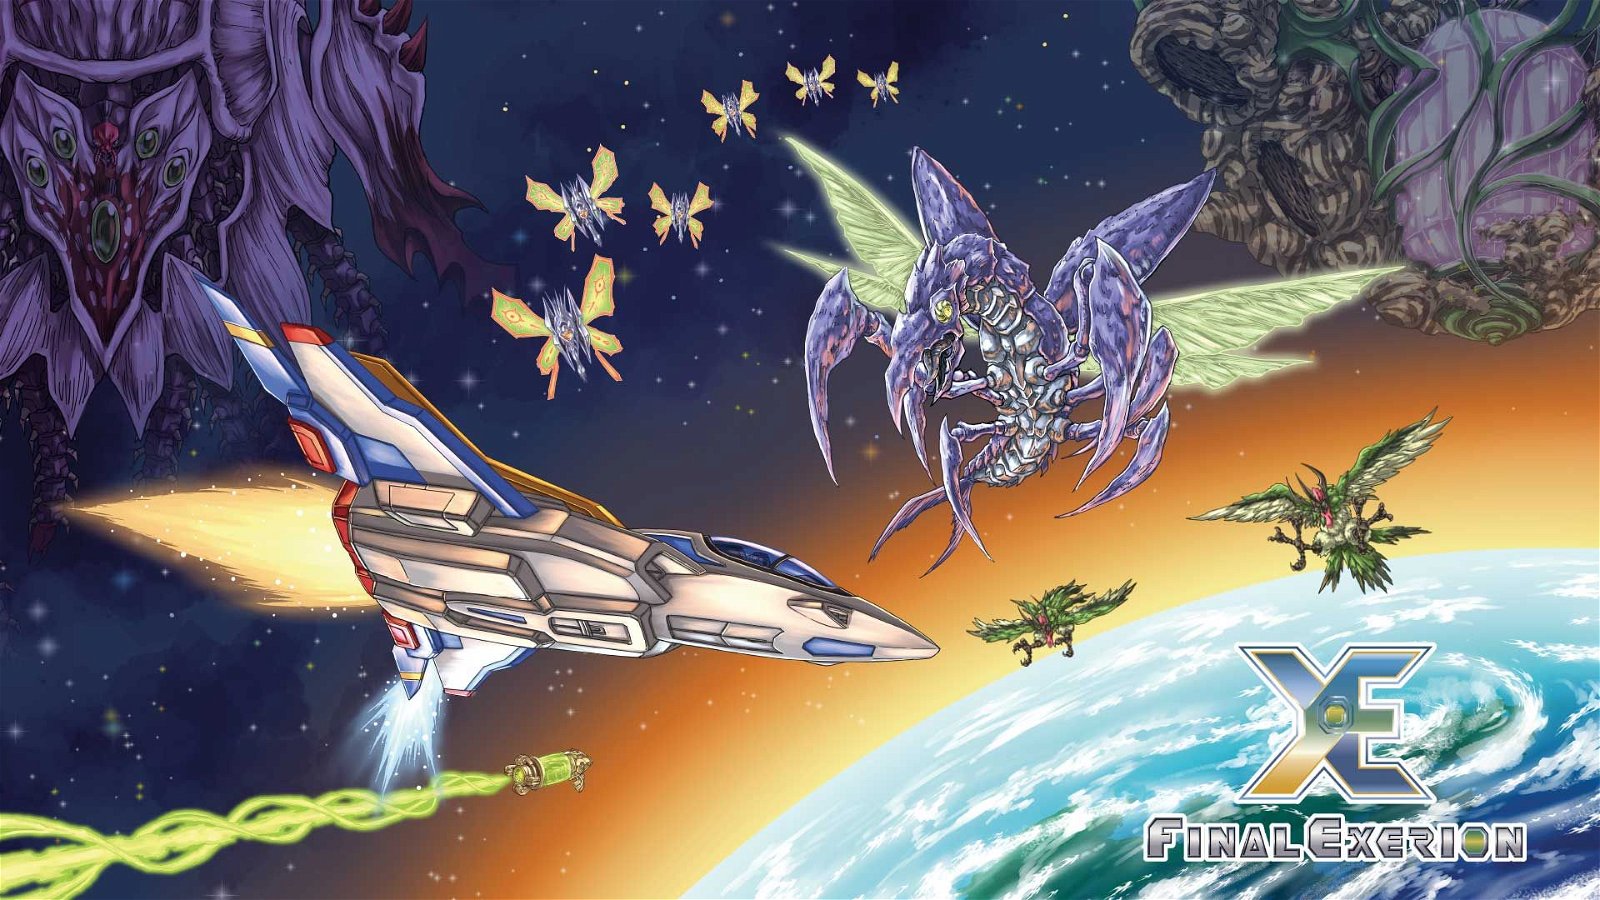 Image of Final Exerion